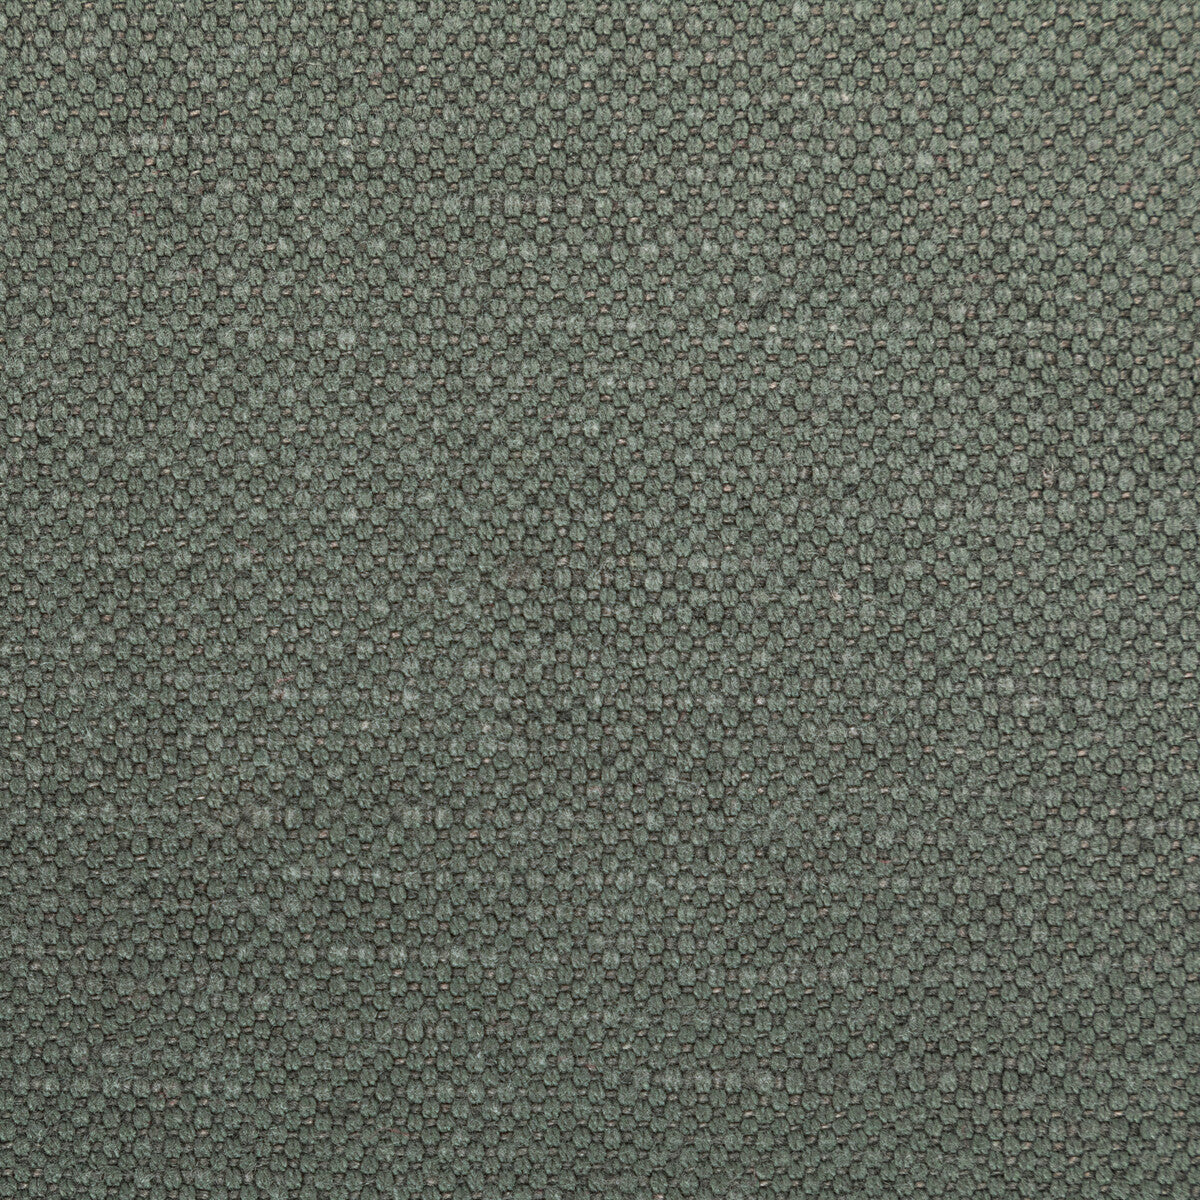 Carson fabric in pewter color - pattern 36282.21.0 - by Kravet Basics